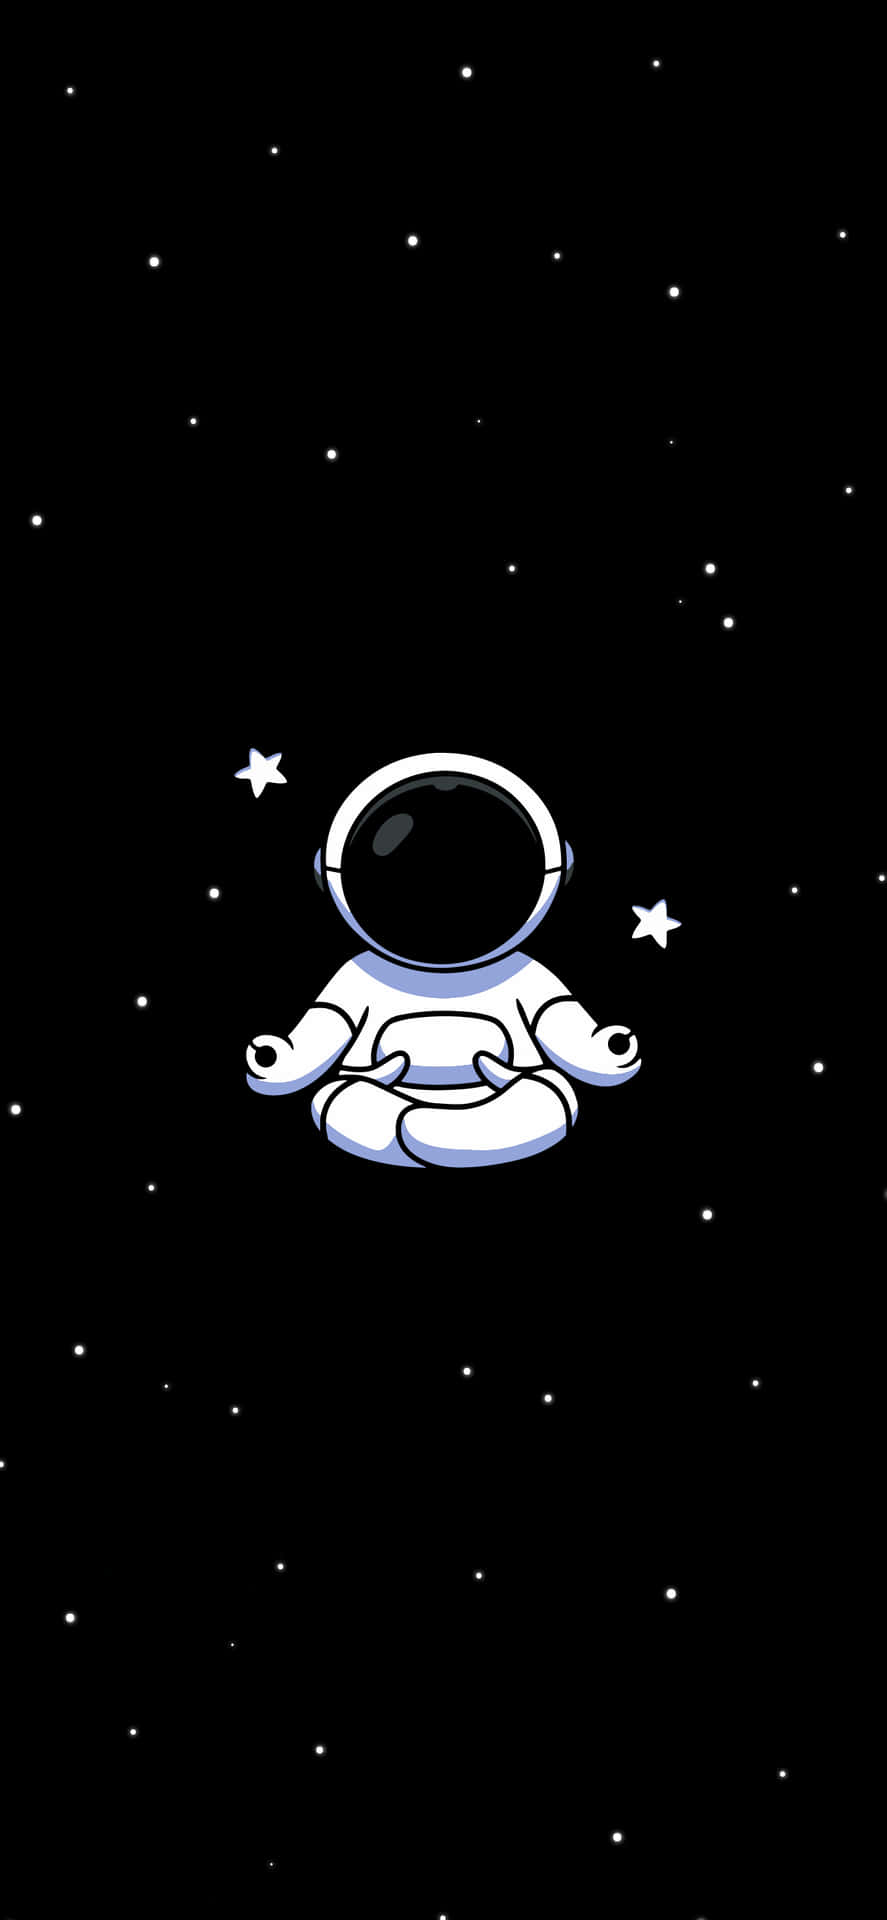 Share more than 56 cute wallpapers space latest - in.cdgdbentre